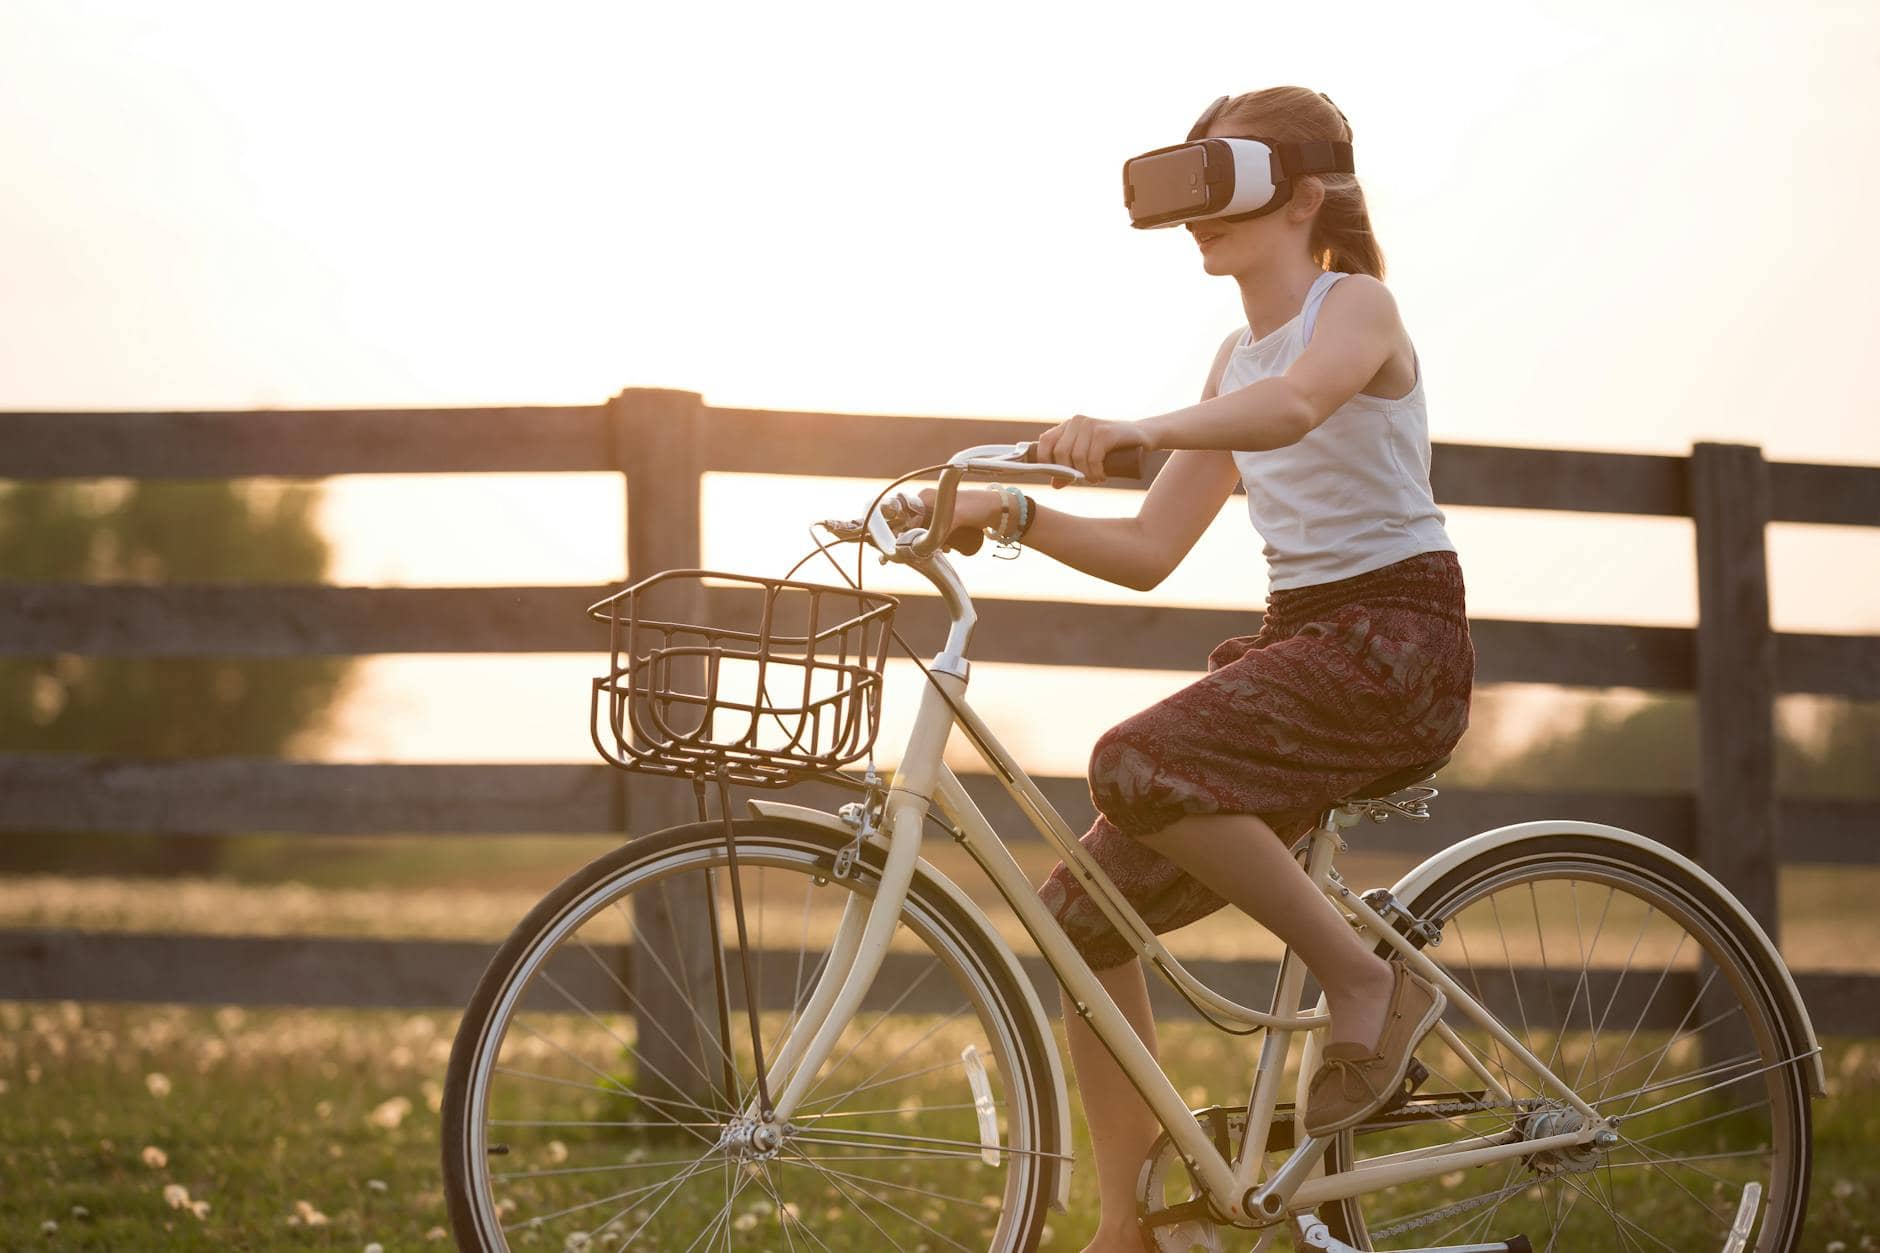 girl wearing vr box driving bicycle during golden hour
how does virtual reality work?